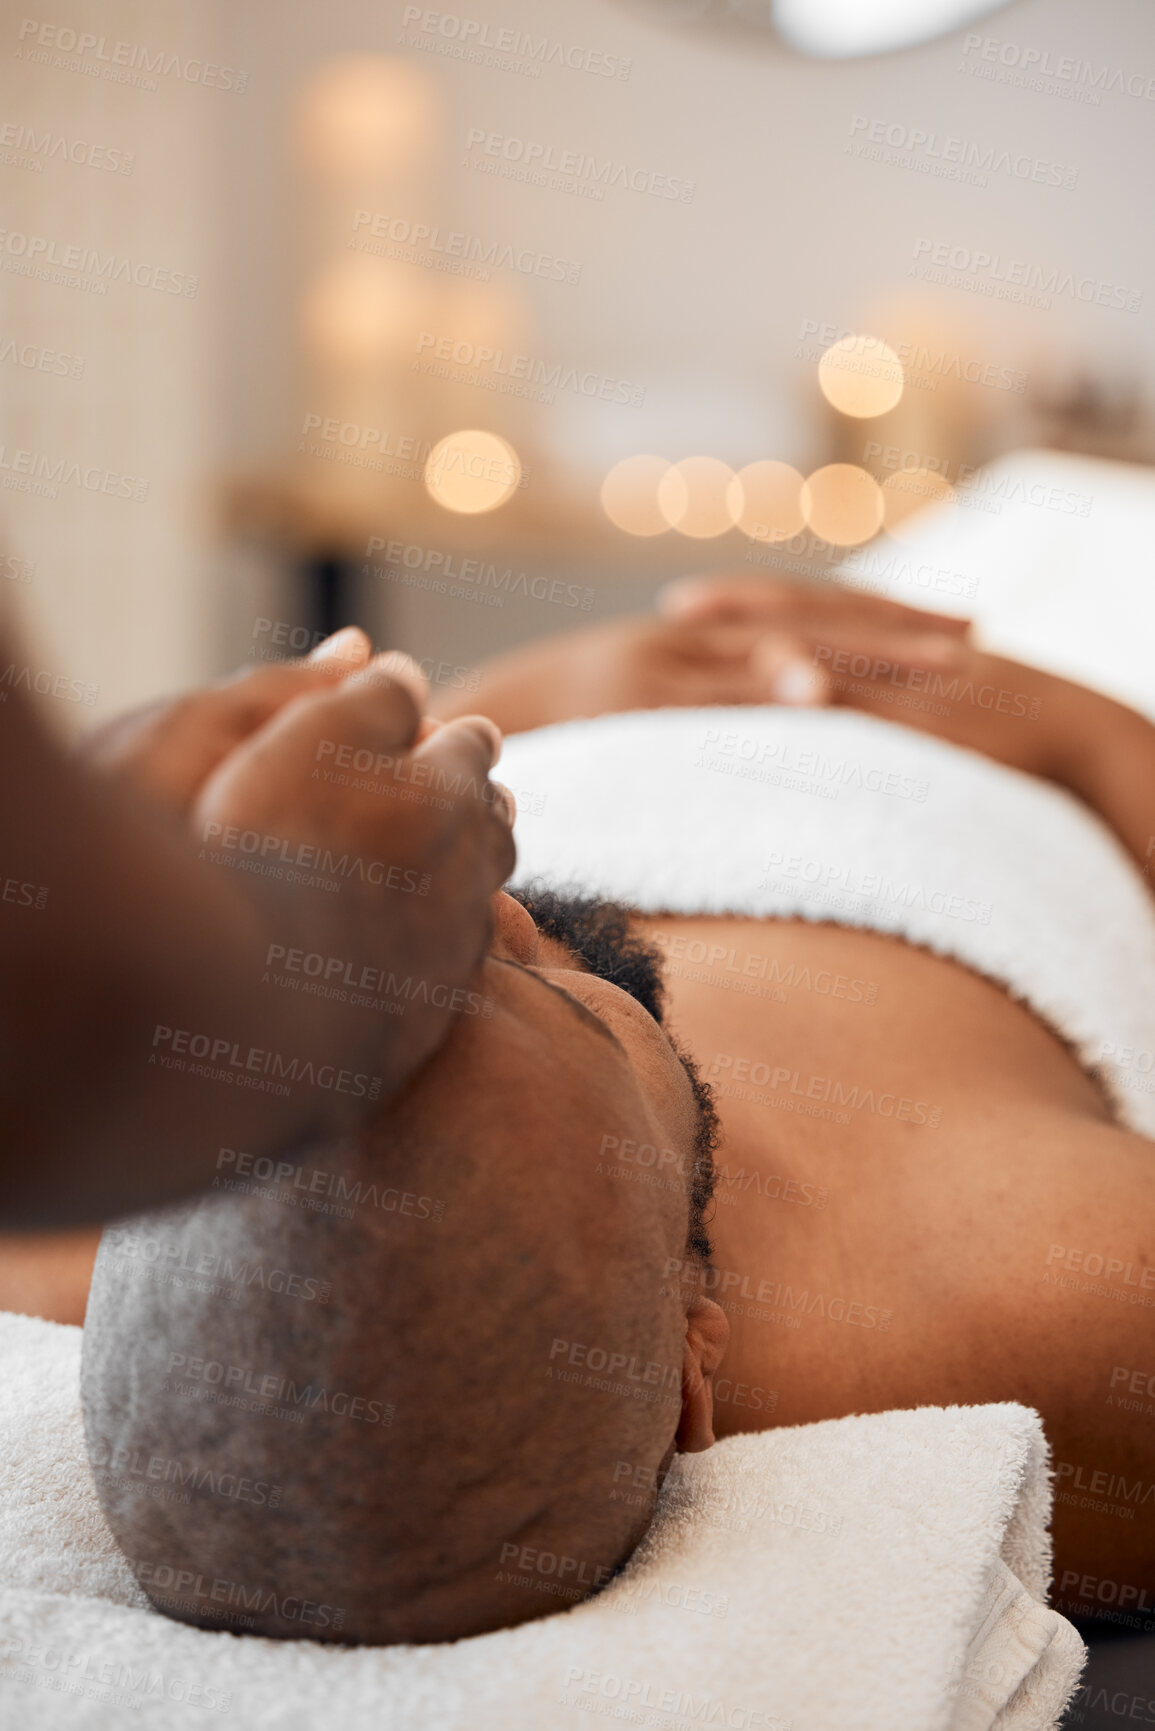 Buy stock photo Black man, head massage or relax spa in relax hotel, wellness salon or luxury resort for self care, mental health or peace. Massage therapist, hands and zen aromatherapy for healthy stress management